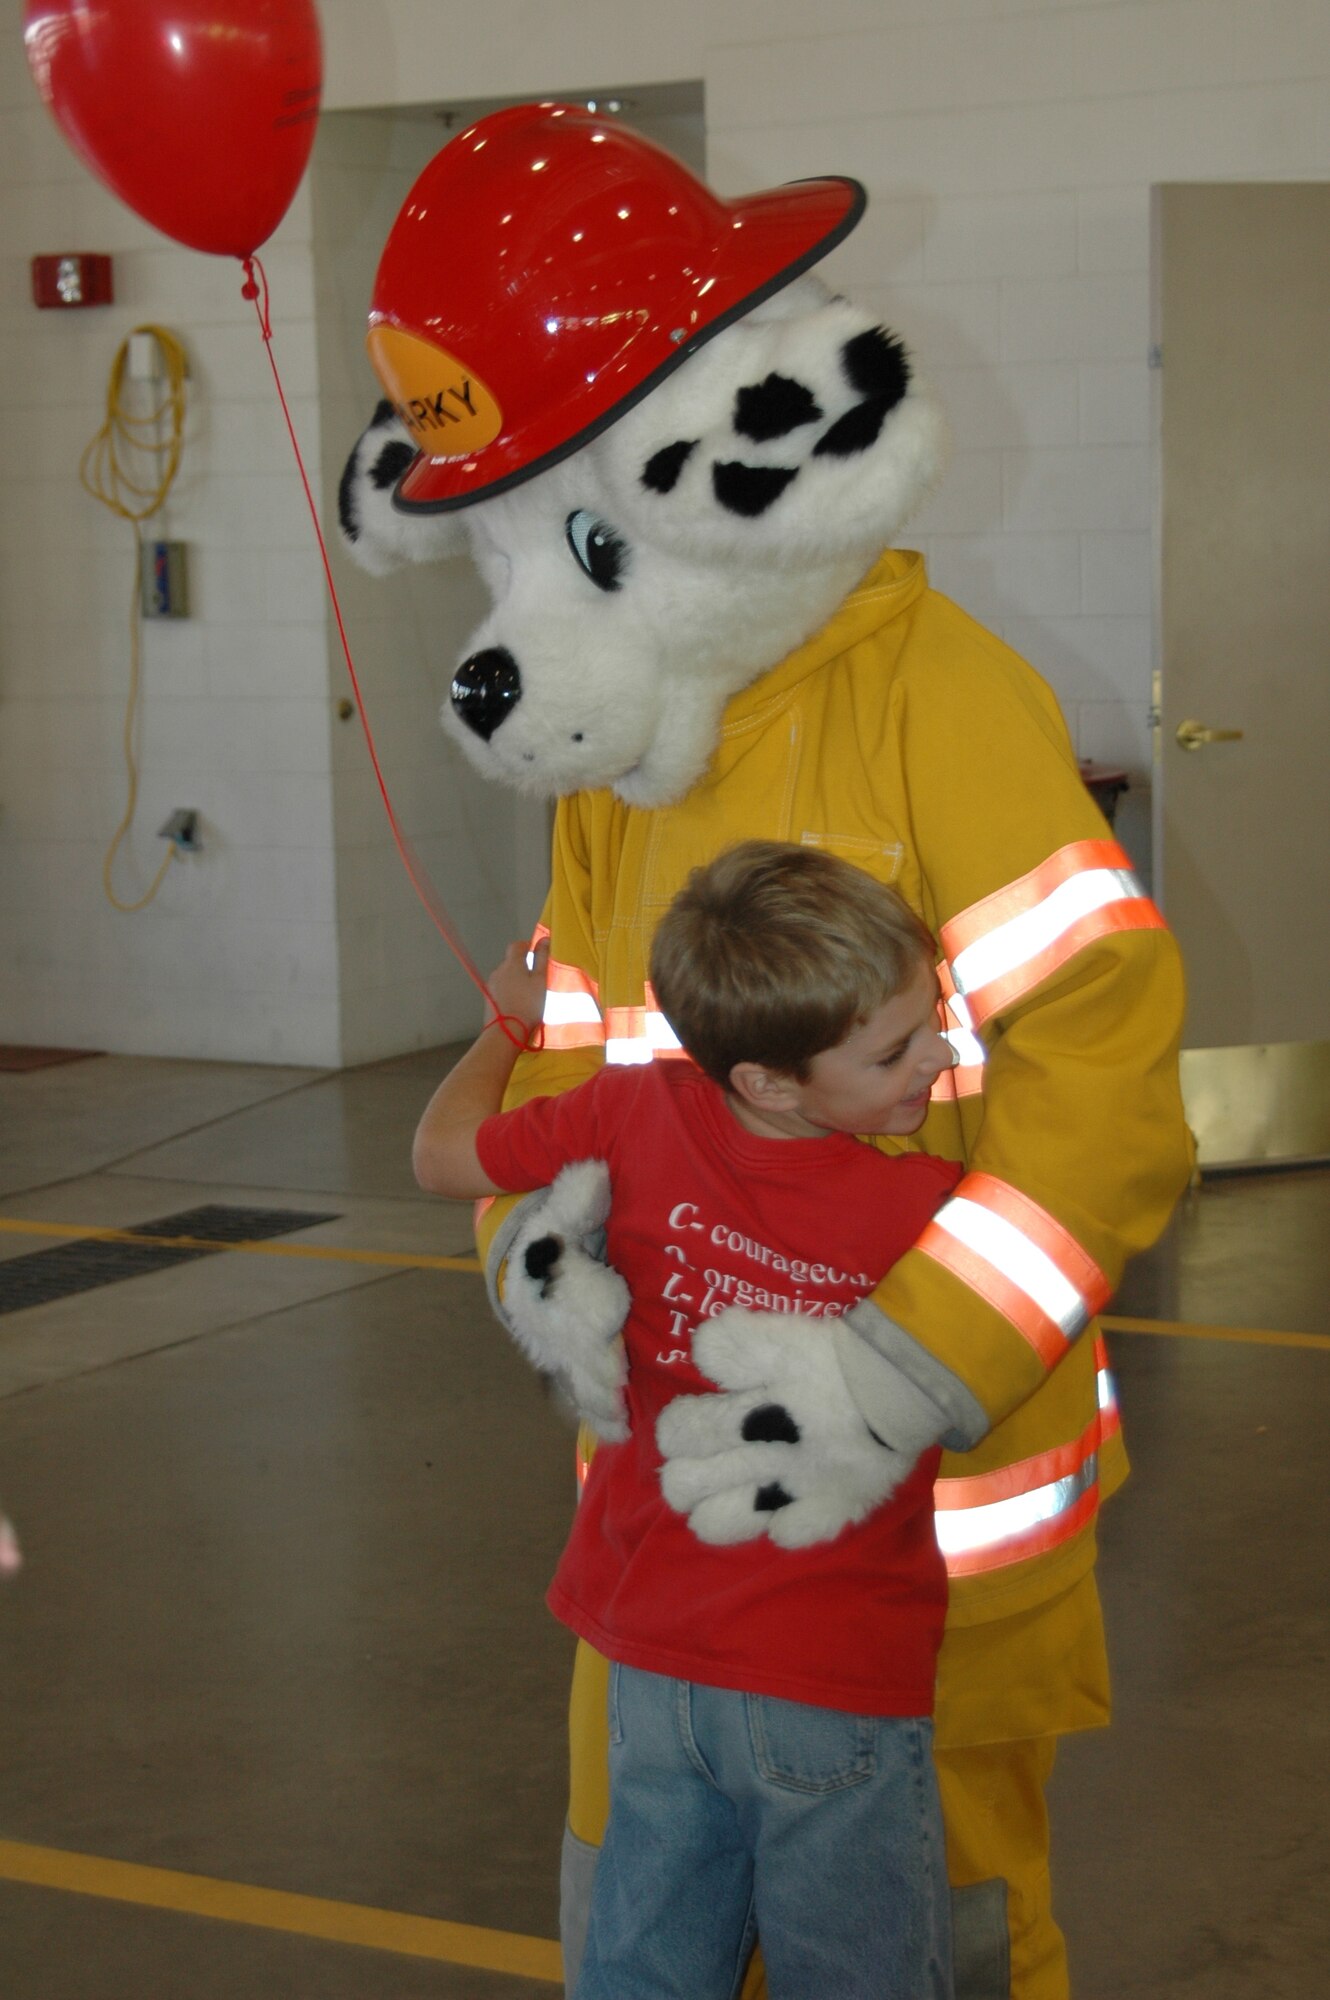 Sparky gets a hug from an admiring child during an open house at the fire department Oct. 6. The open house was preceeded by a Fire Prevention Week Parade. This year's theme is Practice your Escape Plan.
(U.S. Air Force photo/Airman 1st Class Kimberly Moore Limrick)